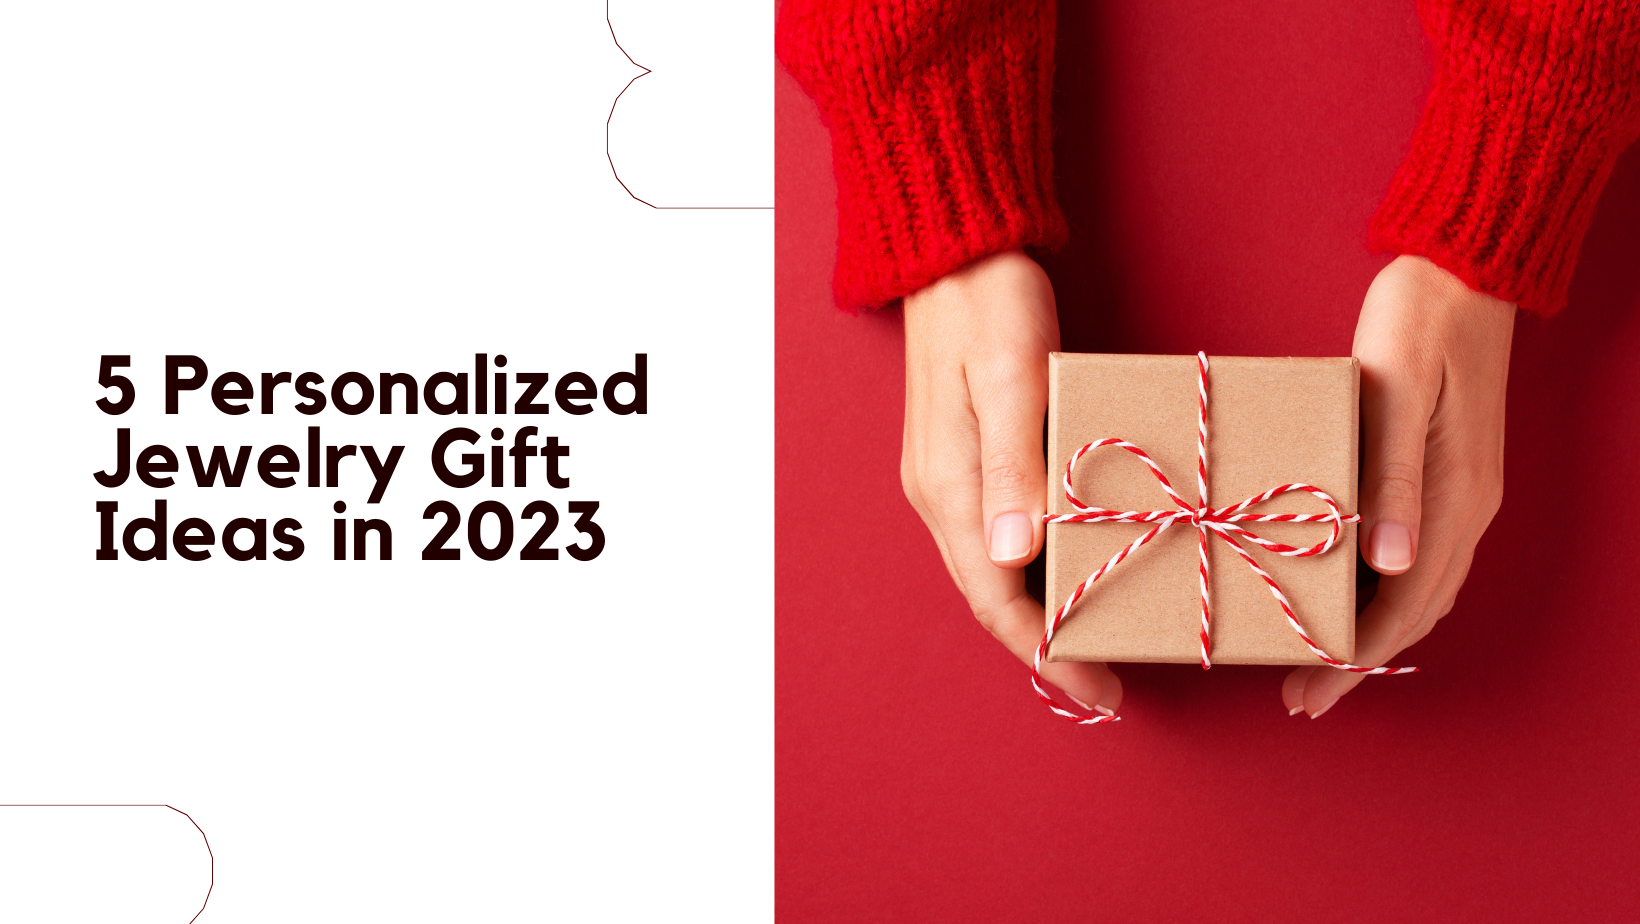 5 Personalized Jewelry Gift Ideas for Christmas 2023